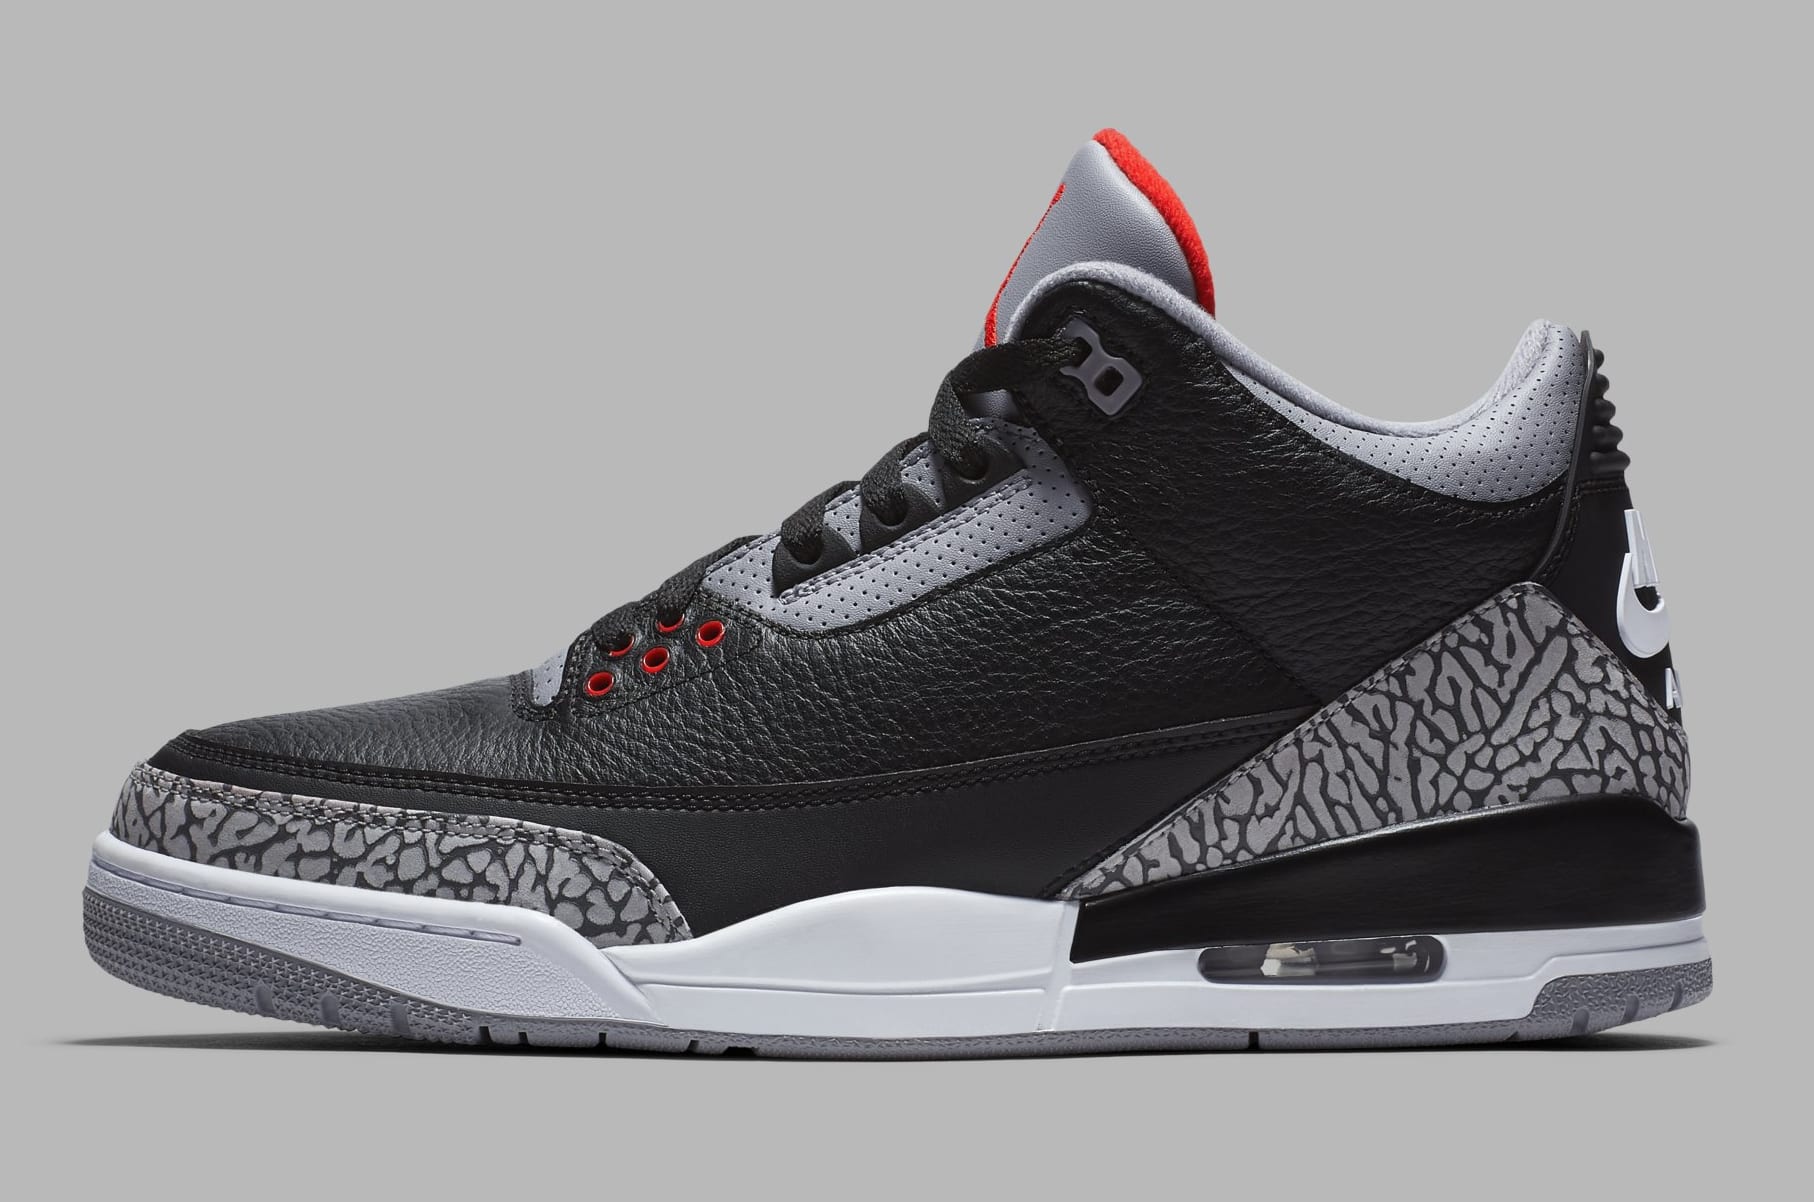 Air Jordan 3 Black/Cement Grey-White-Fire Red 854262-001 (Lateral)